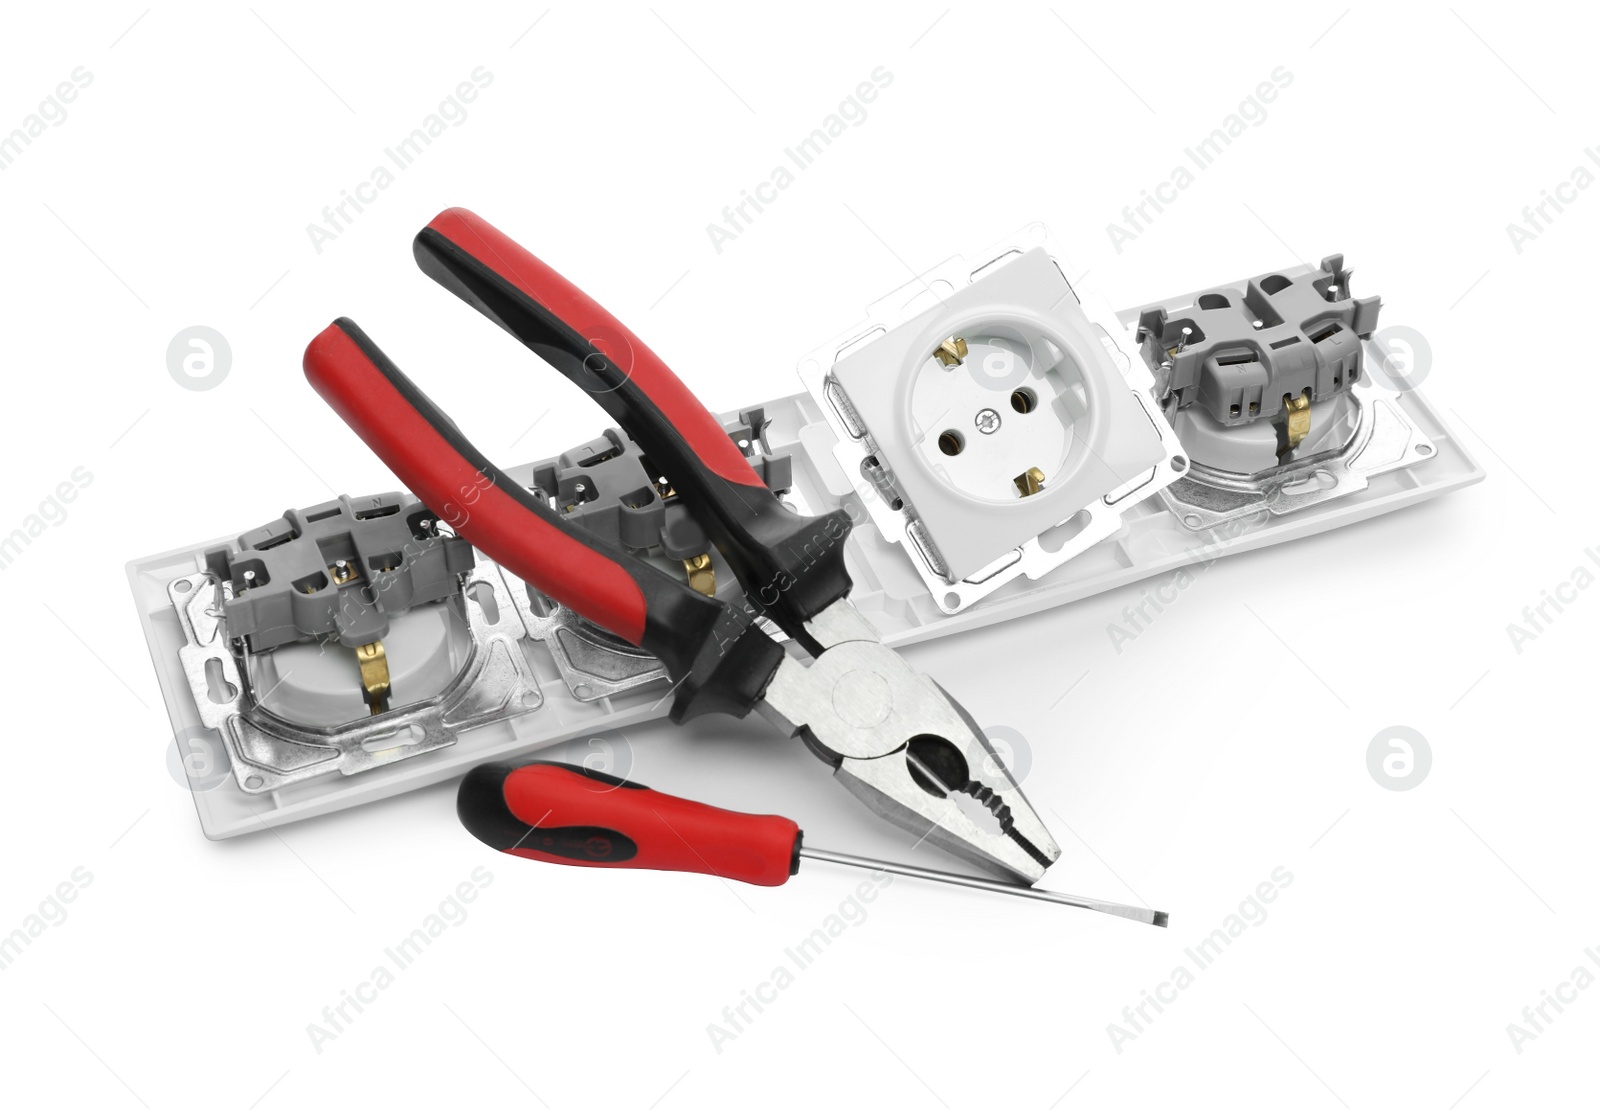 Photo of Set of sockets and electrician's tools isolated on white